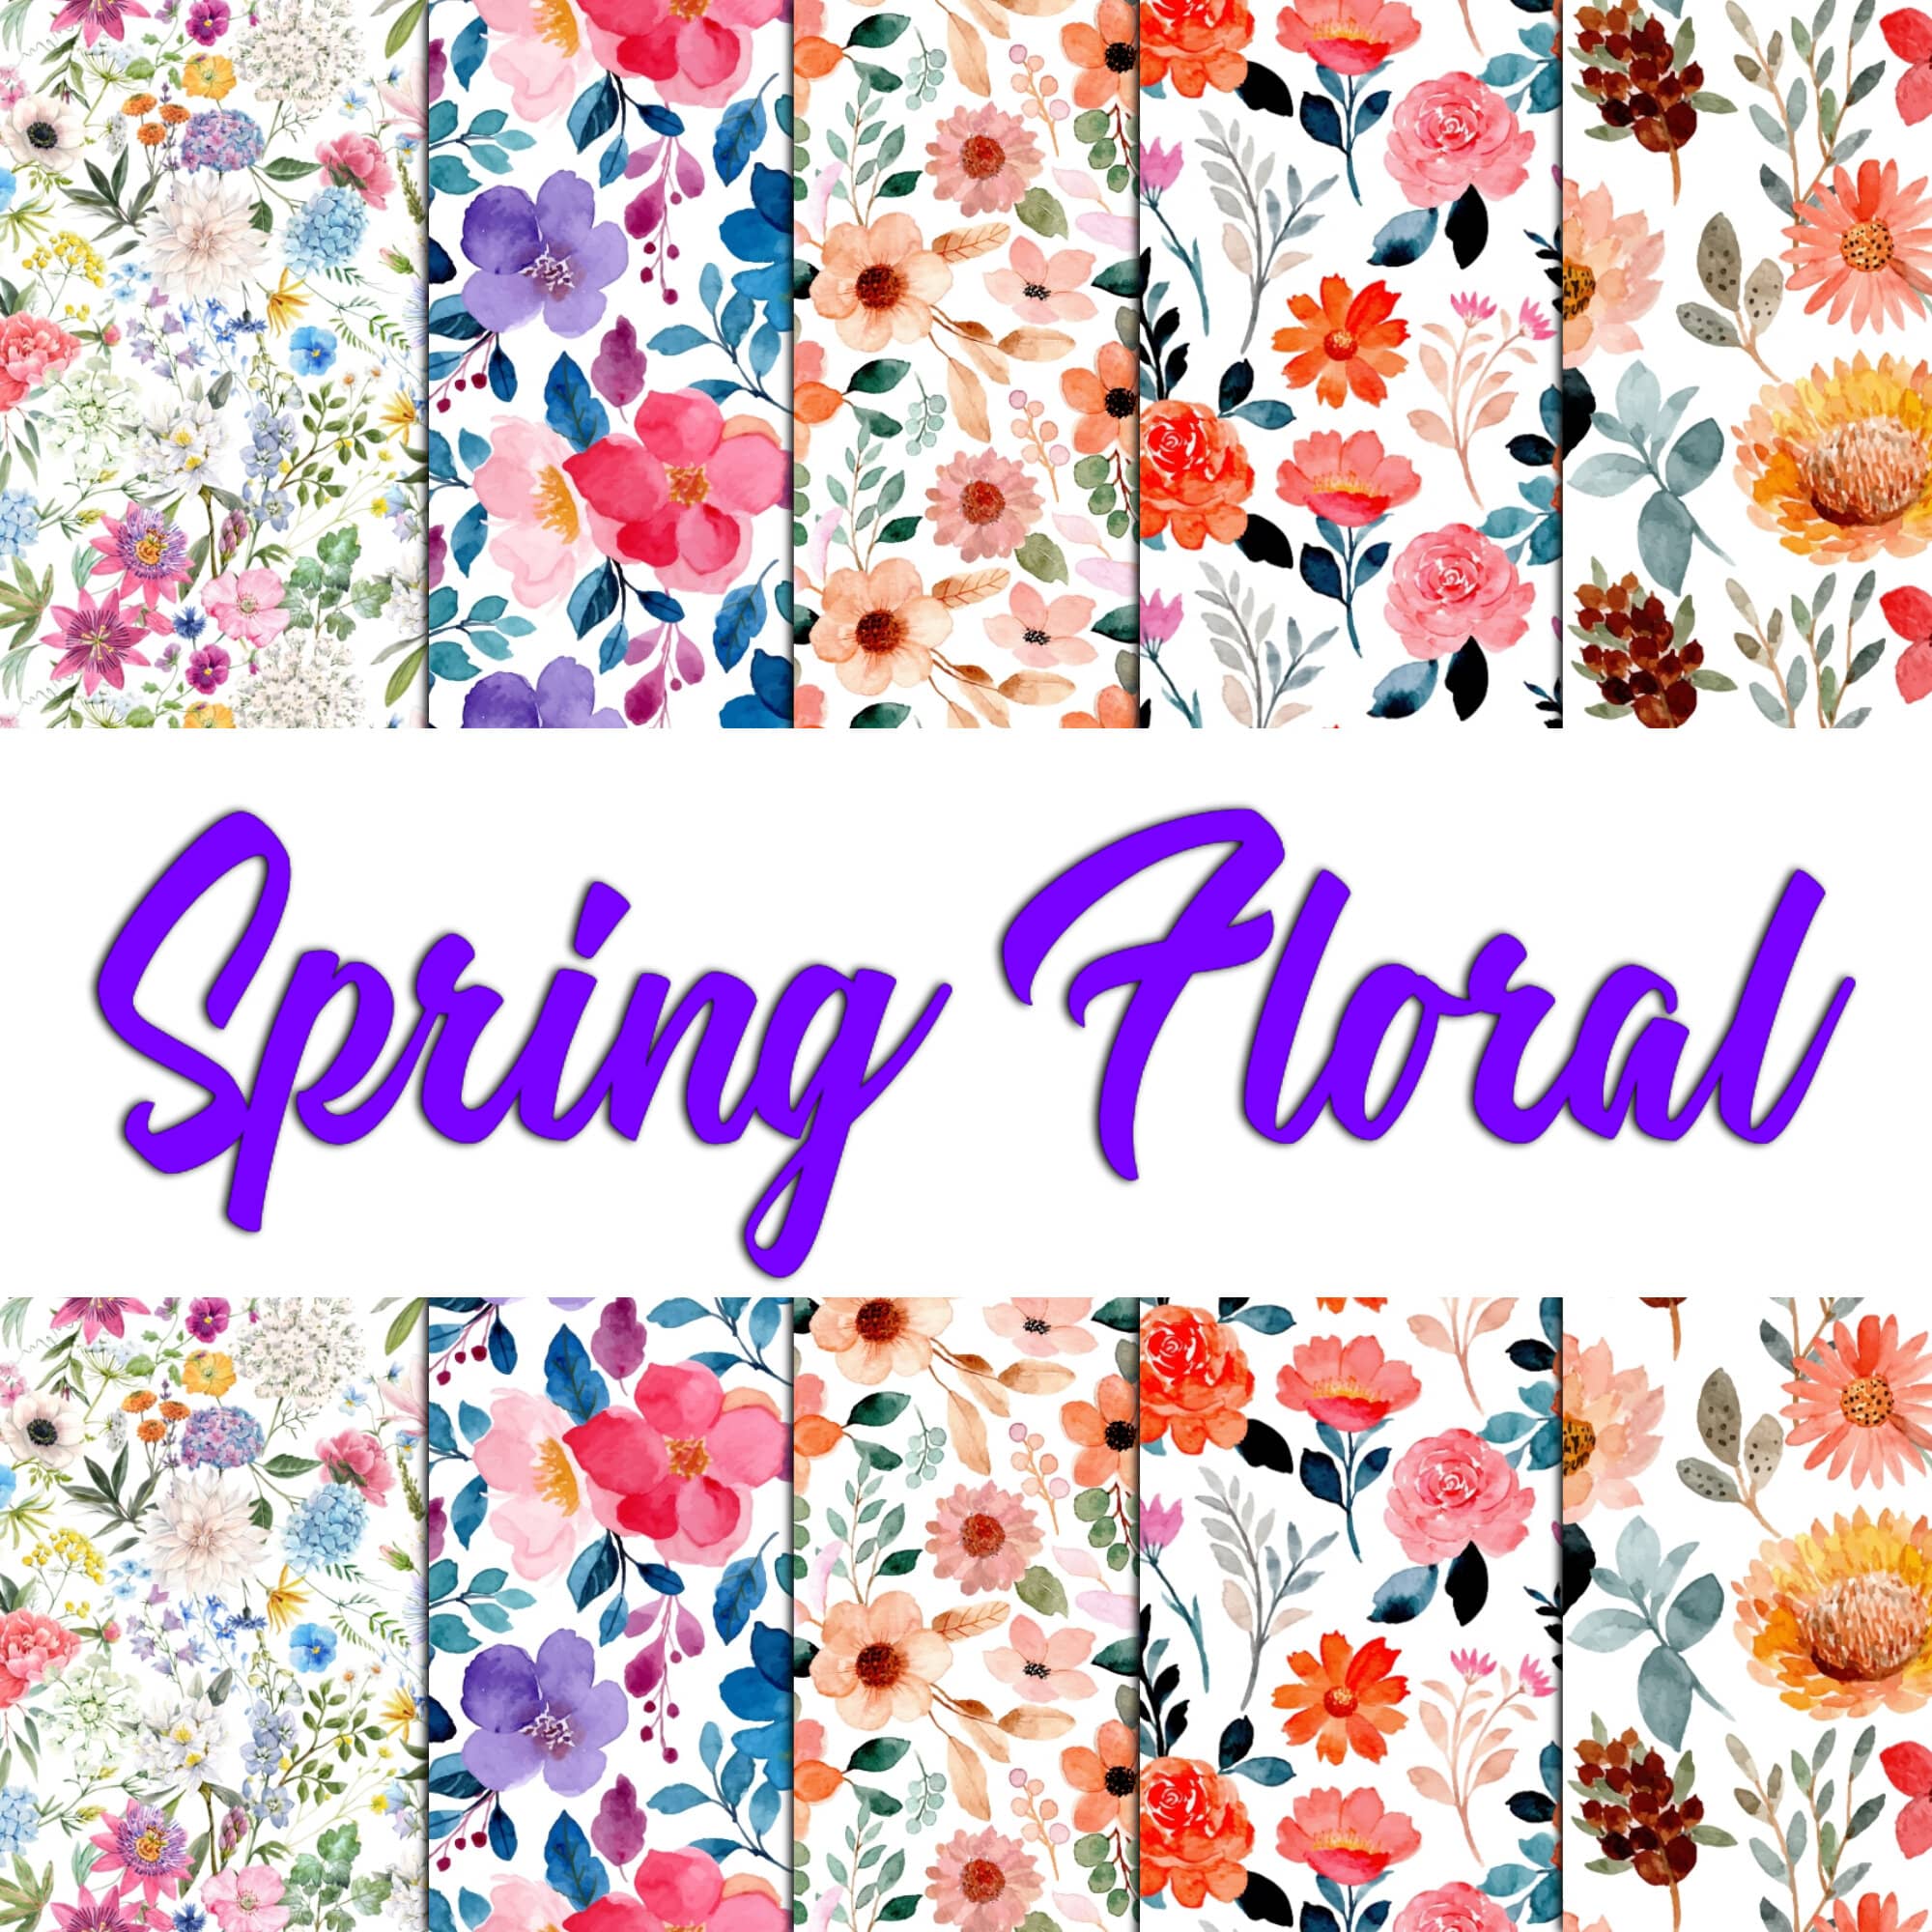 Spring Floral Watercolor - Flower Patterns - Pack of 5 - Floral Sublimation cover image.